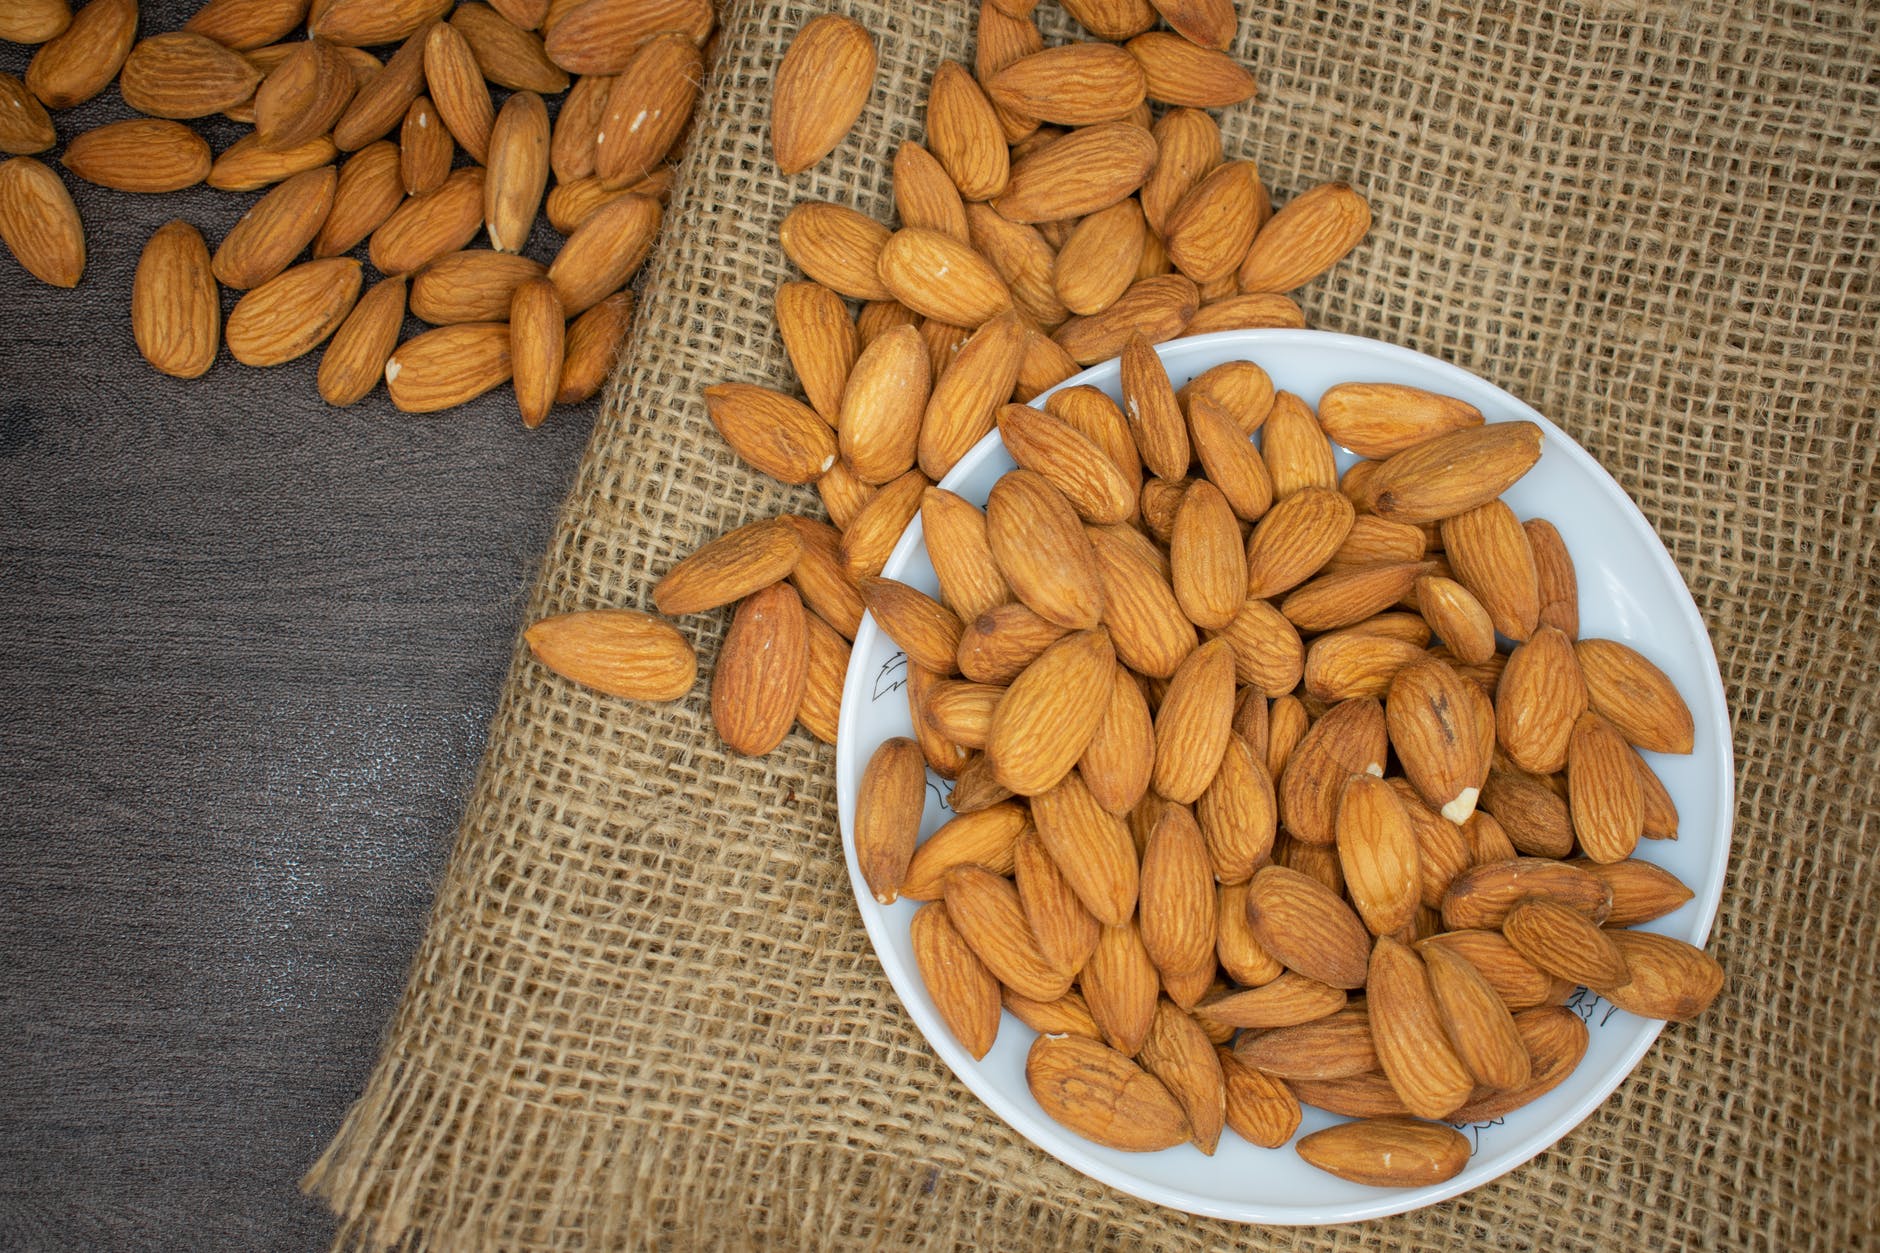 Superfoods for weight loss - Almonds